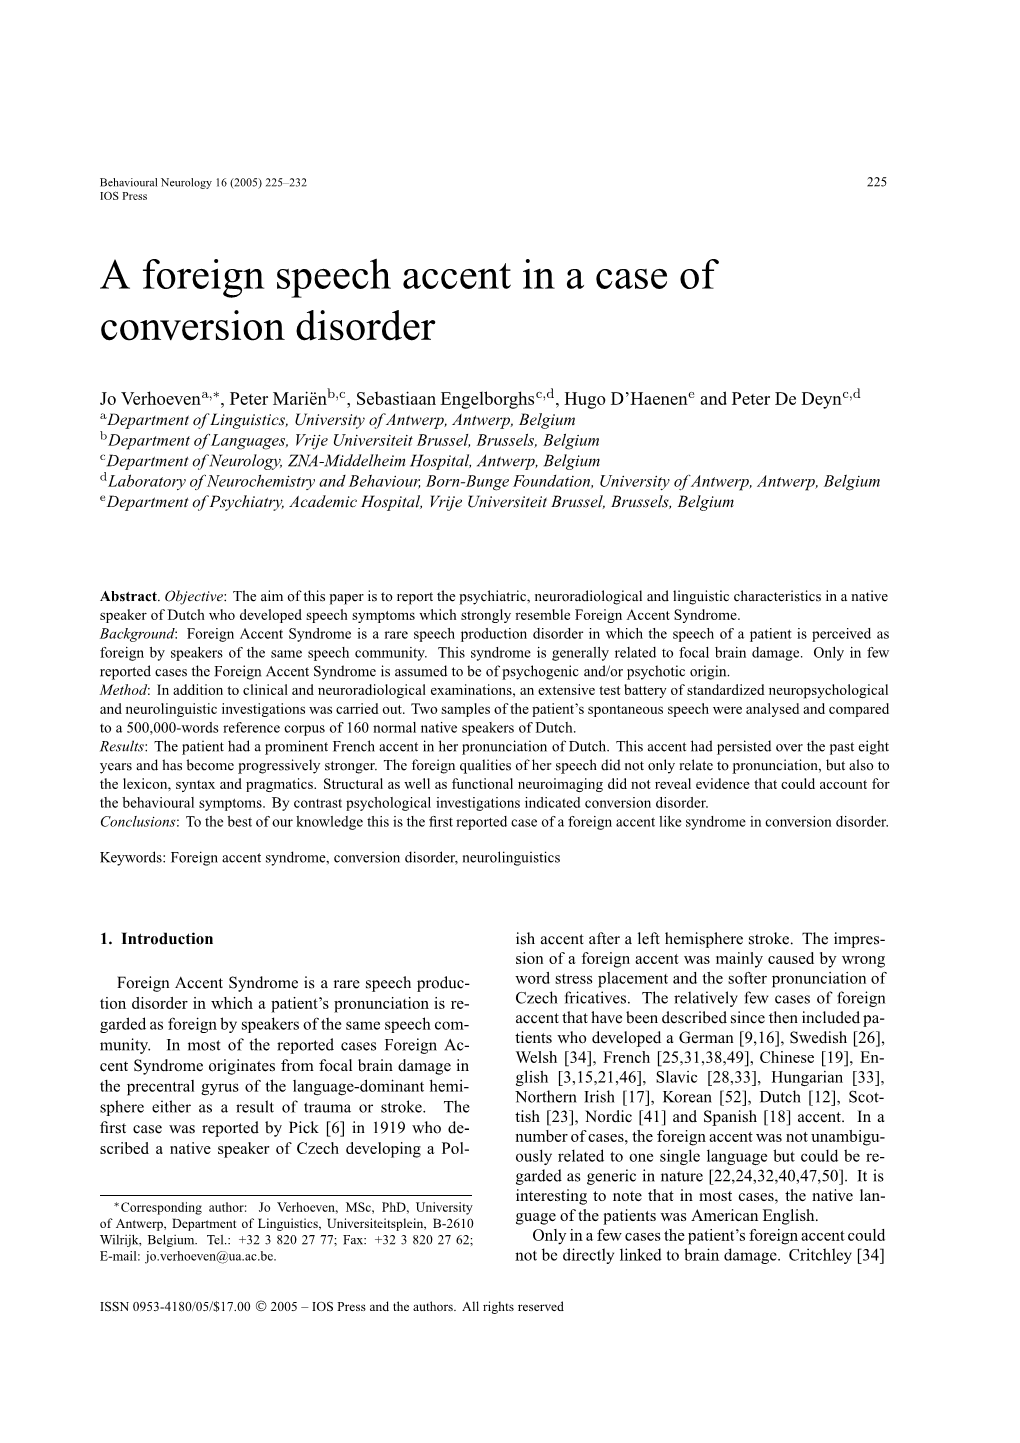 A Foreign Speech Accent in a Case of Conversion Disorder